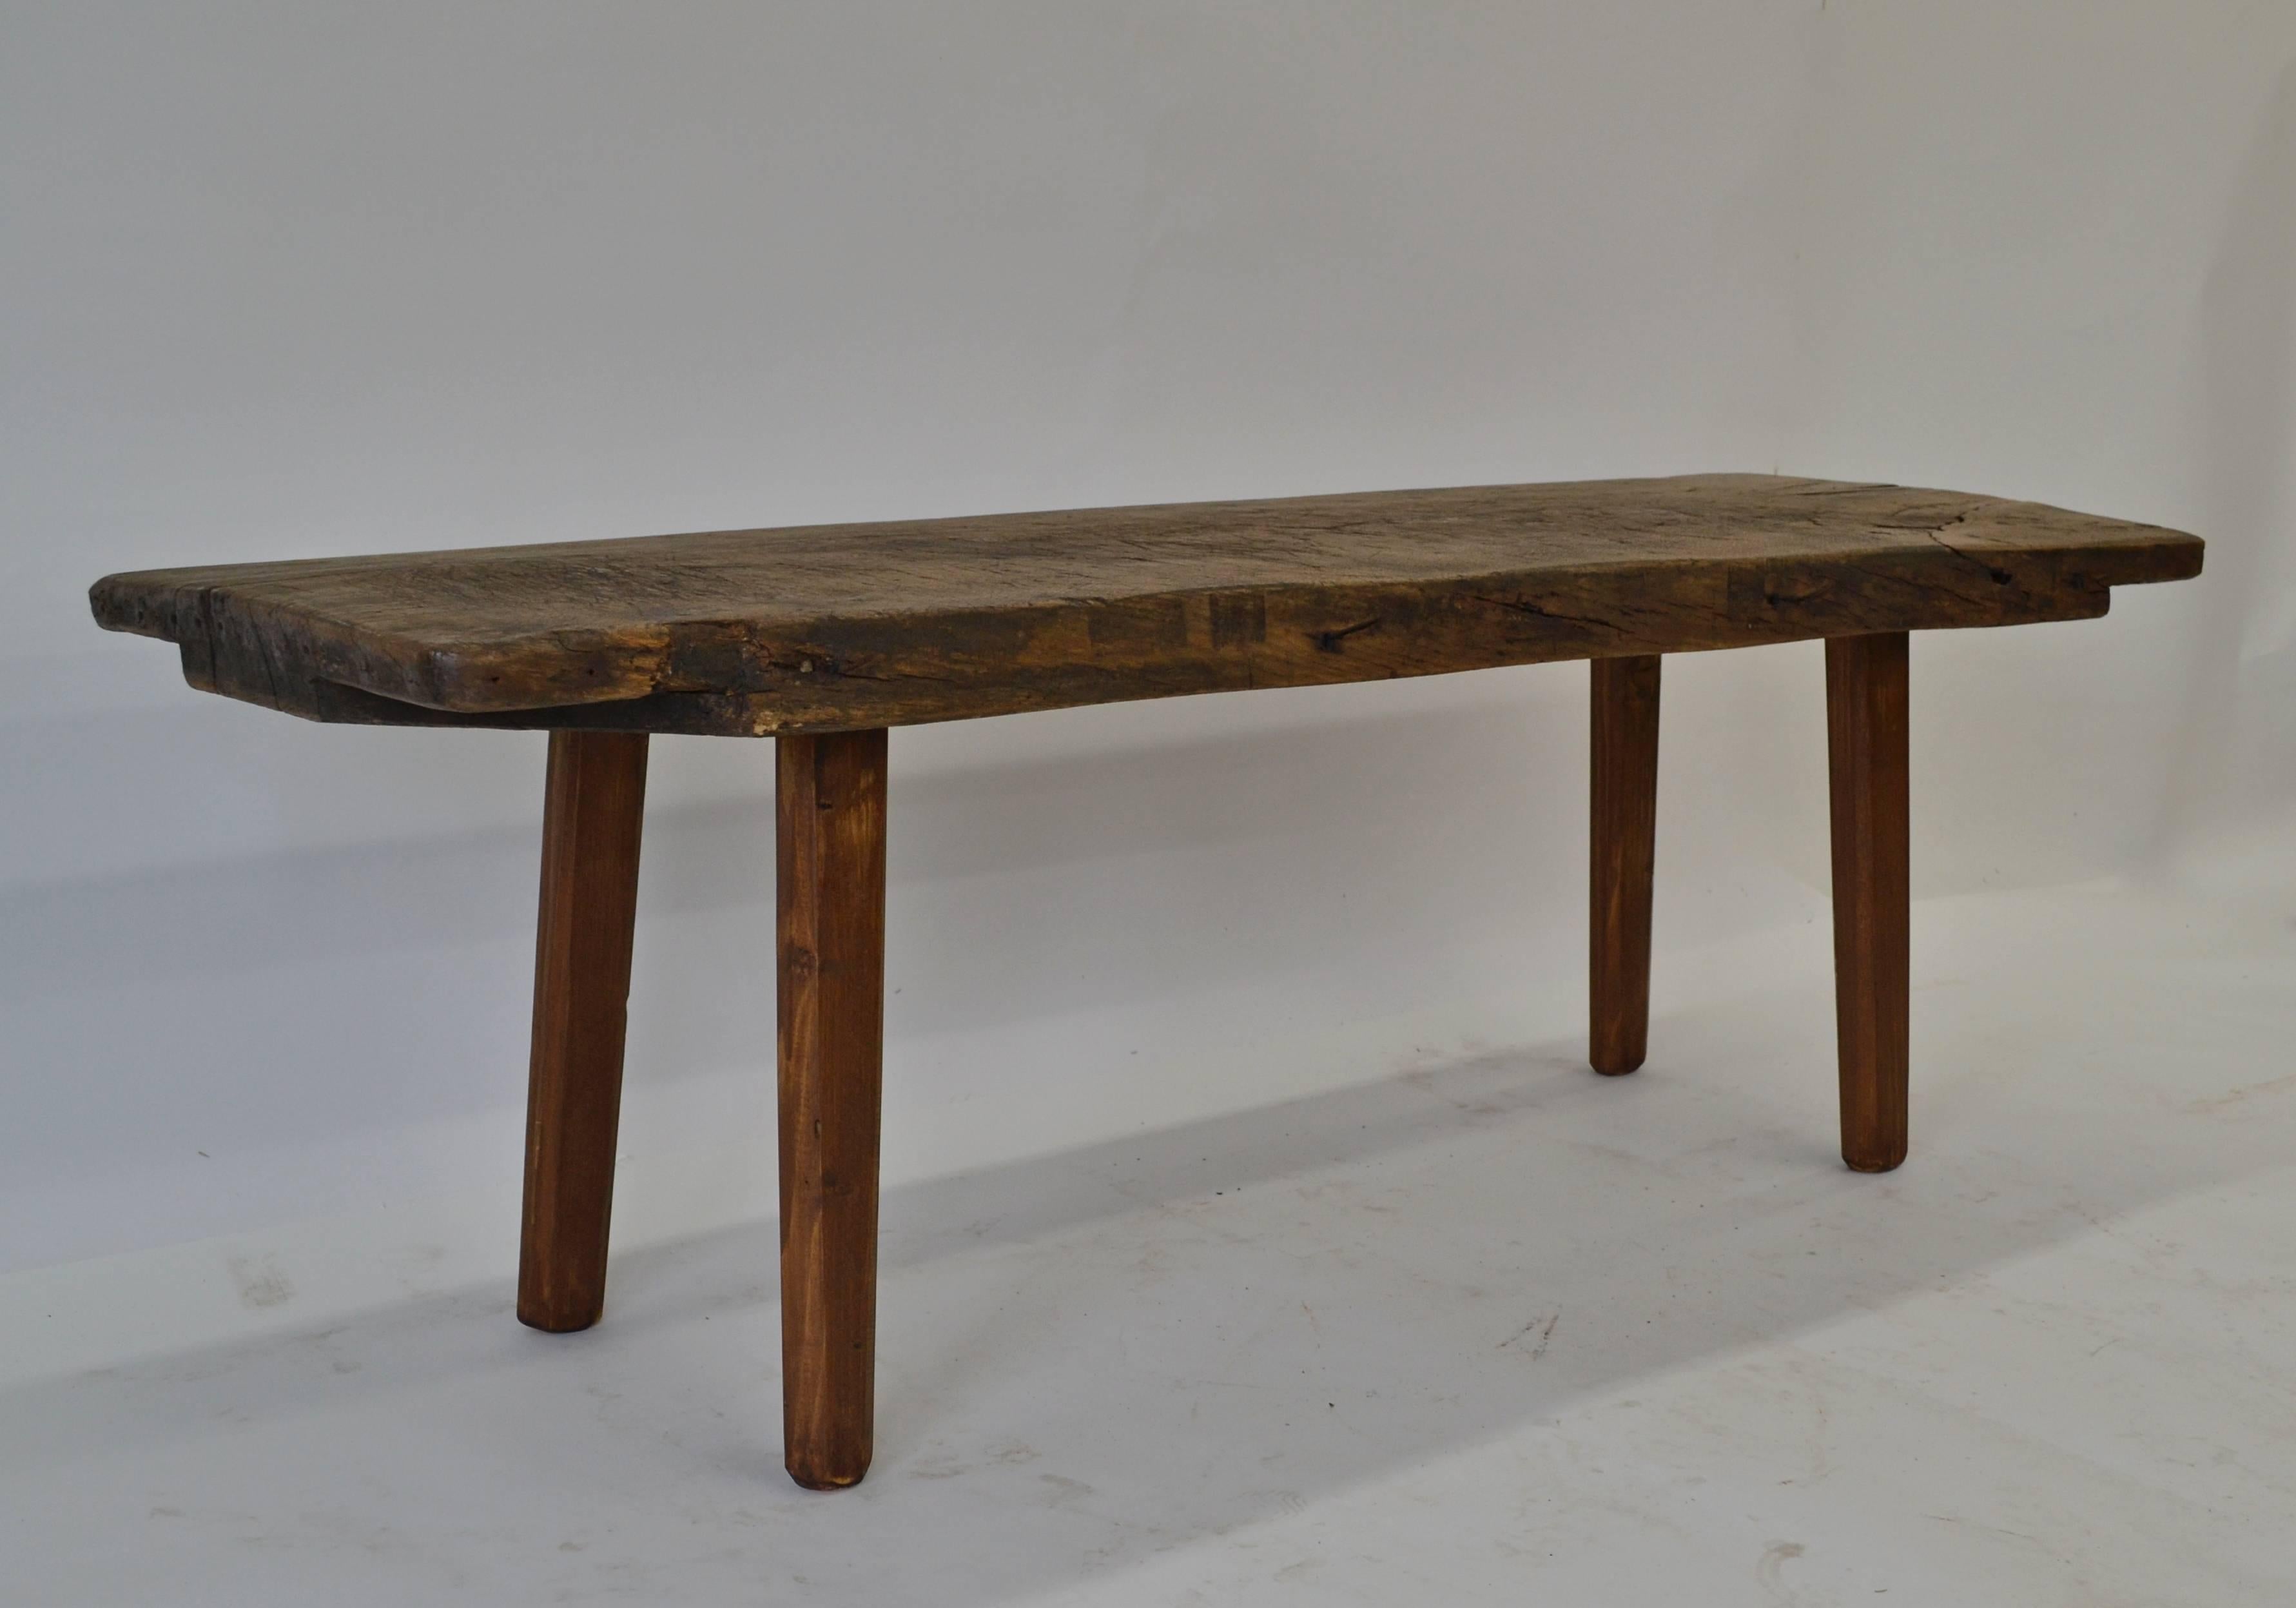 This is a marvelously scored, gnarled and beaten up antique pig bench with a 2.5” thick oak top, cut to 20” high for use as a coffee table or low table for plants or as an entryway or mudroom bench for taking off boots and popping them underneath